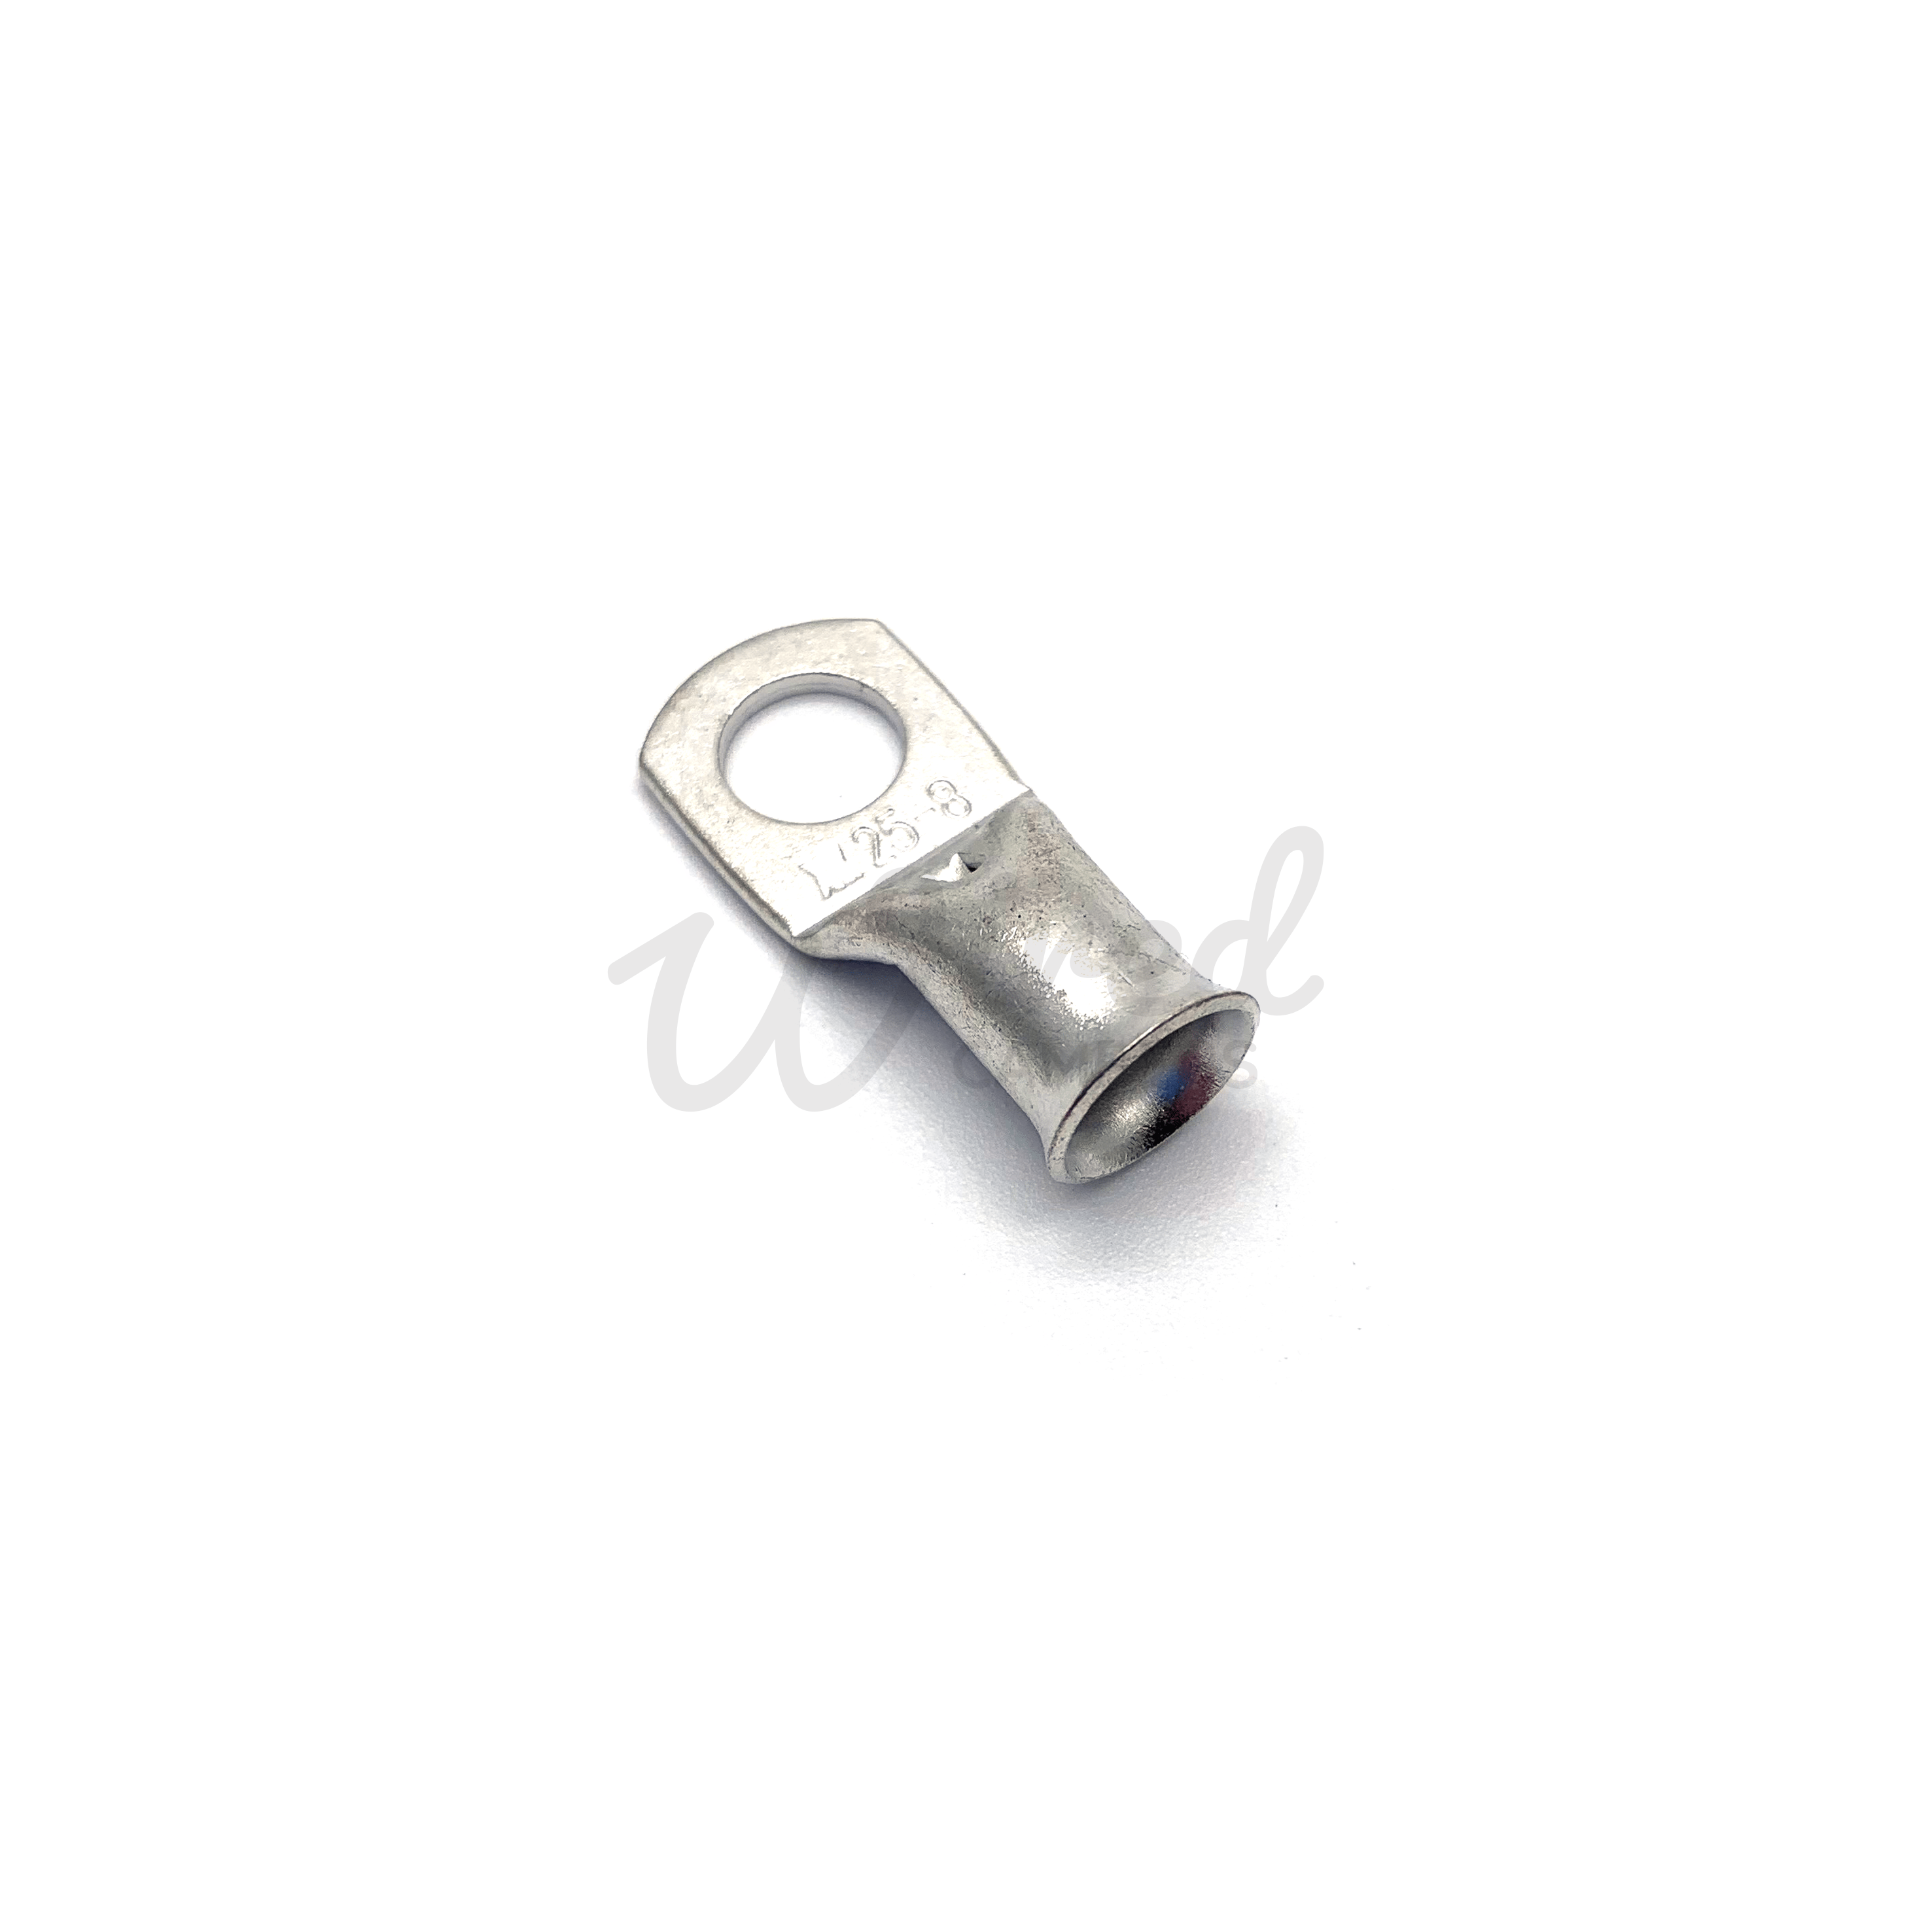 Wired Campers Limited 8mm 10 Pack - Copper Tube Crimp Ring Terminals 25mm² Cable Entry - 6mm/8mm/10mm/12mm Hole